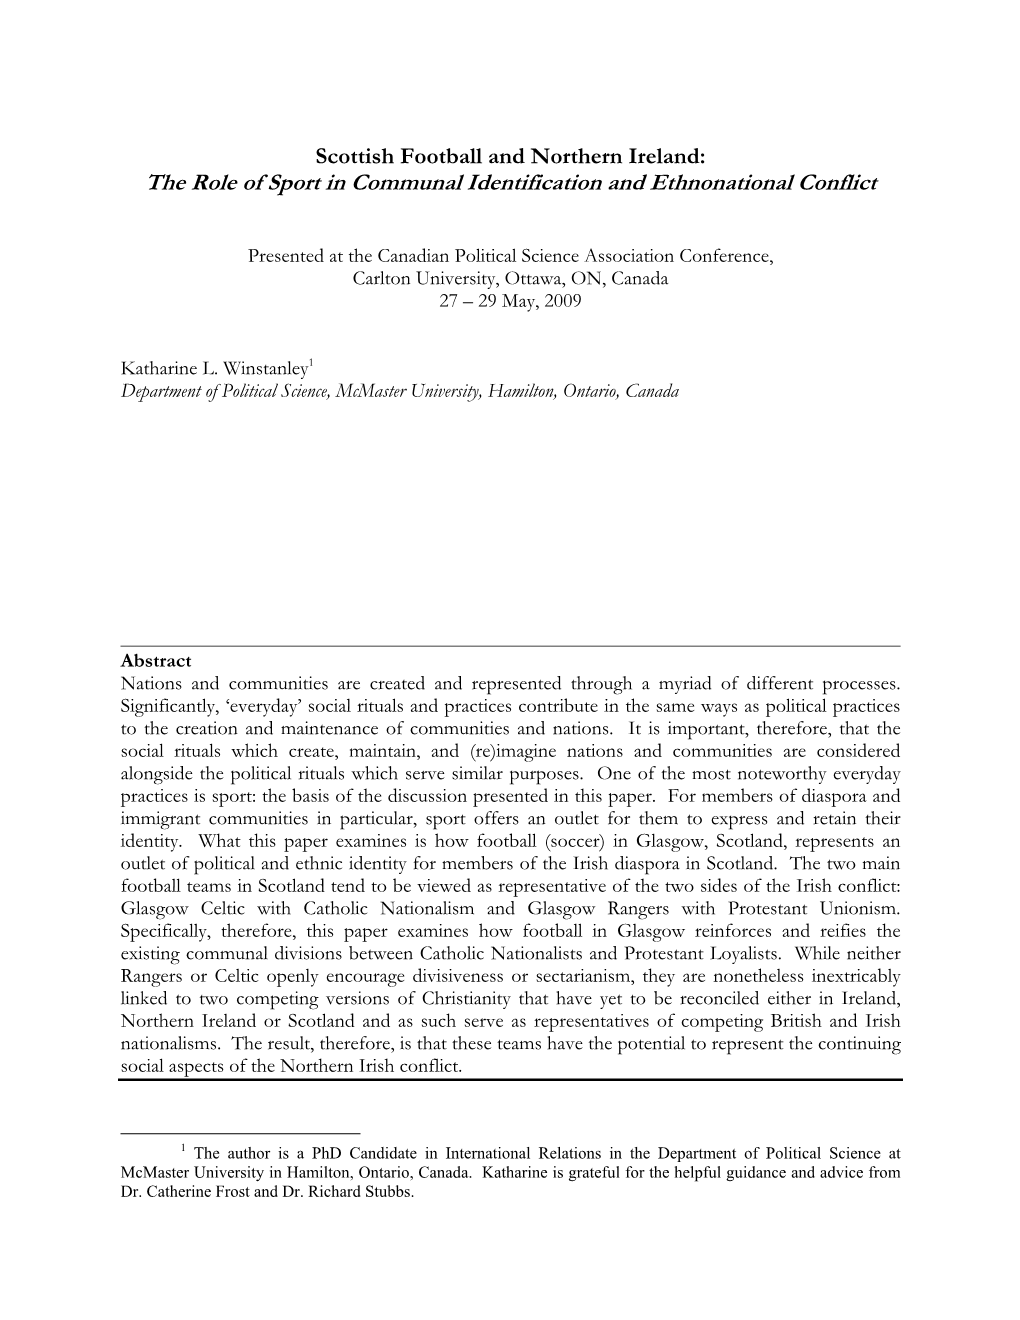 The Role of Sport in Communal Identification and Ethnonational Conflict